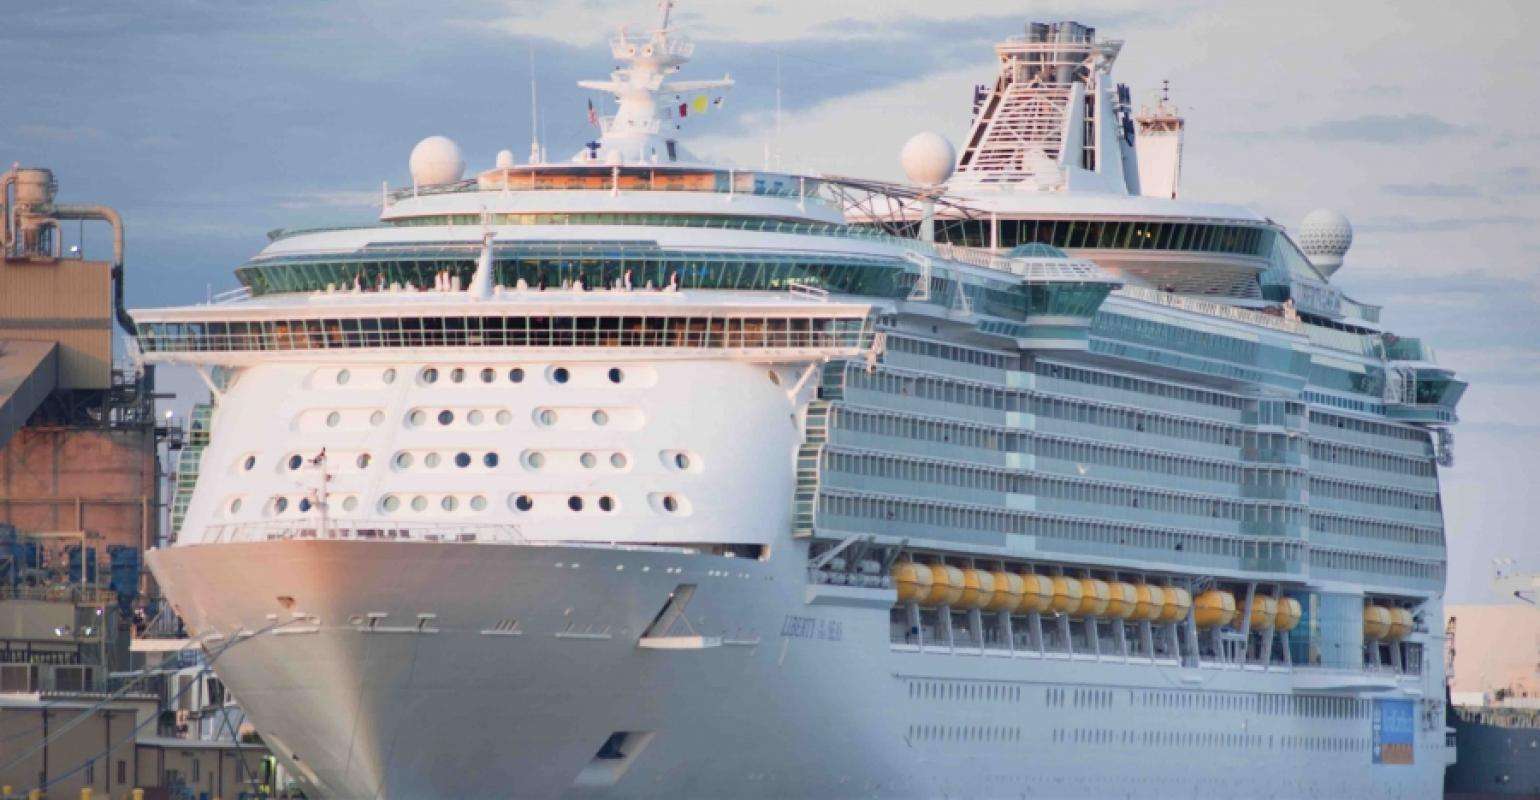 Liberty of the Seas has new home as biggest cruise ship in ...